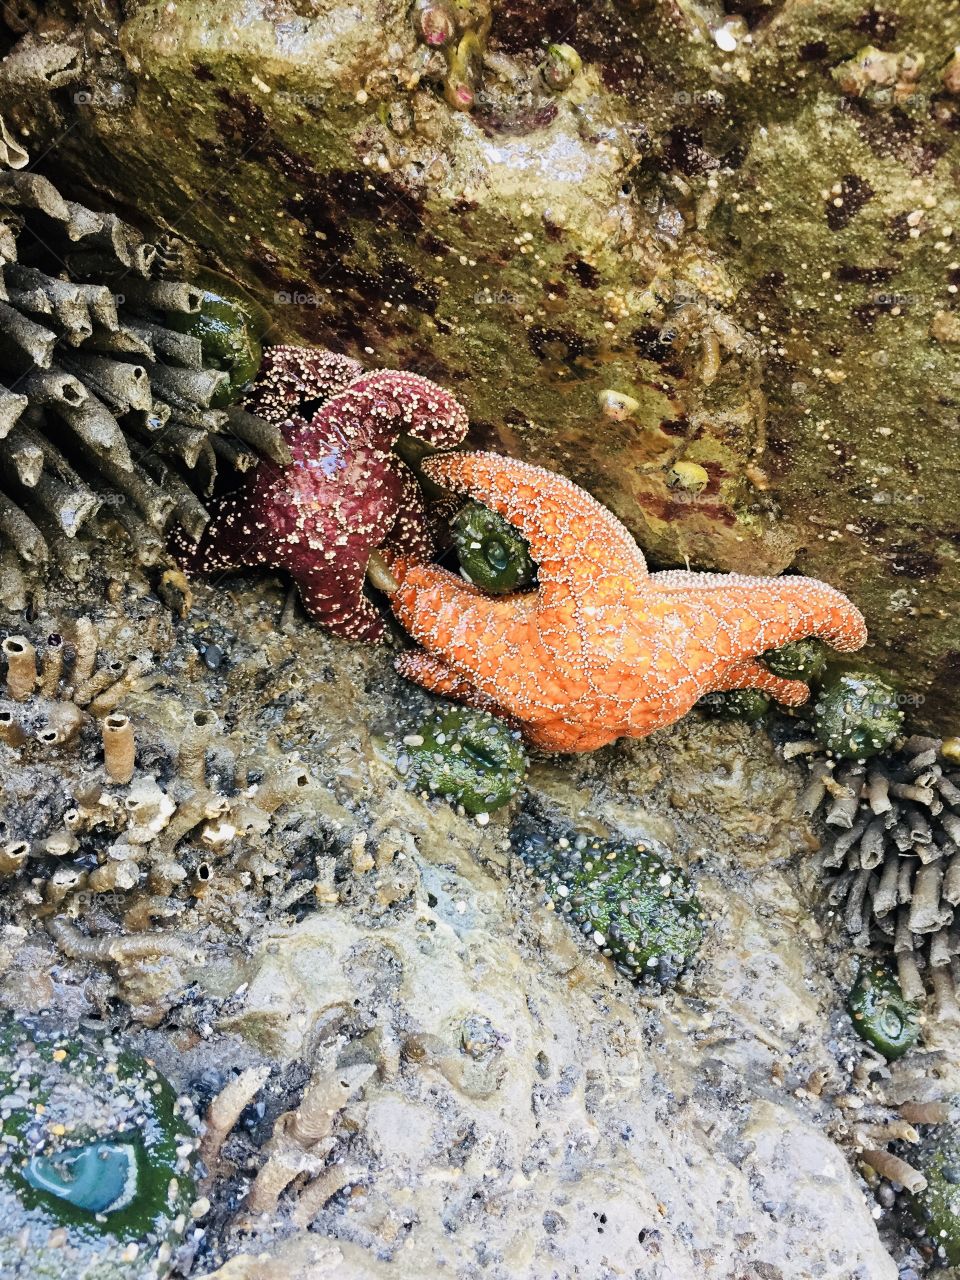 Colorful starfish in tide pools